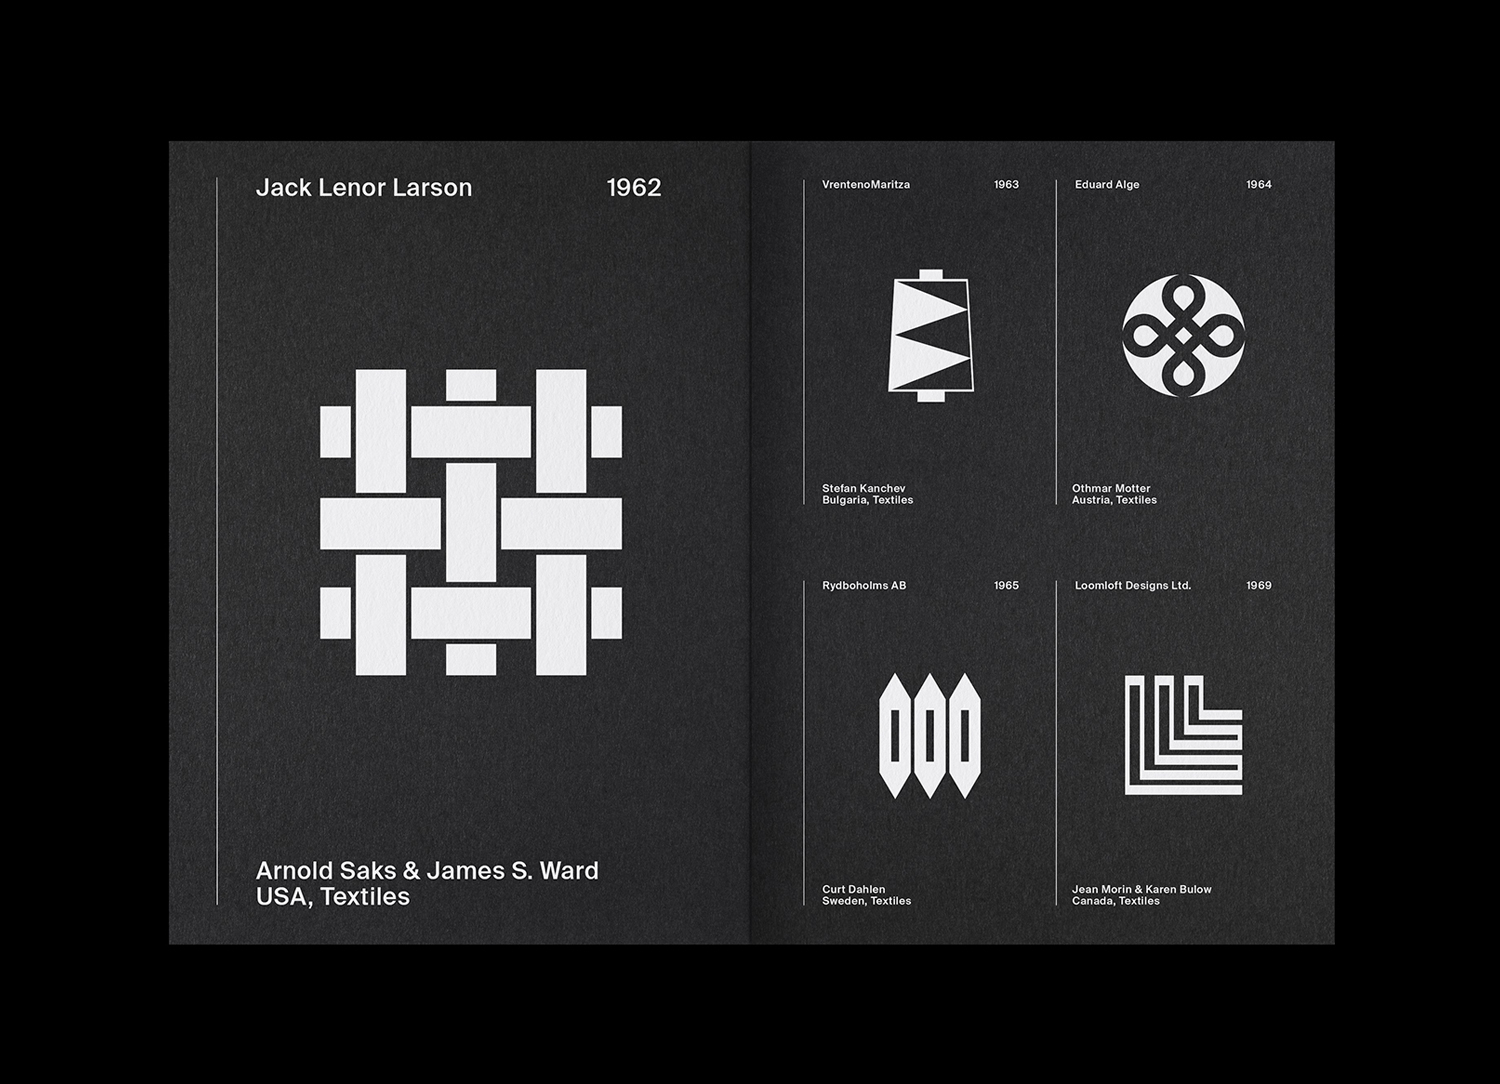 LogoArchive Zine Issue 7, designed and edited by Richard Baird, published by BP&O